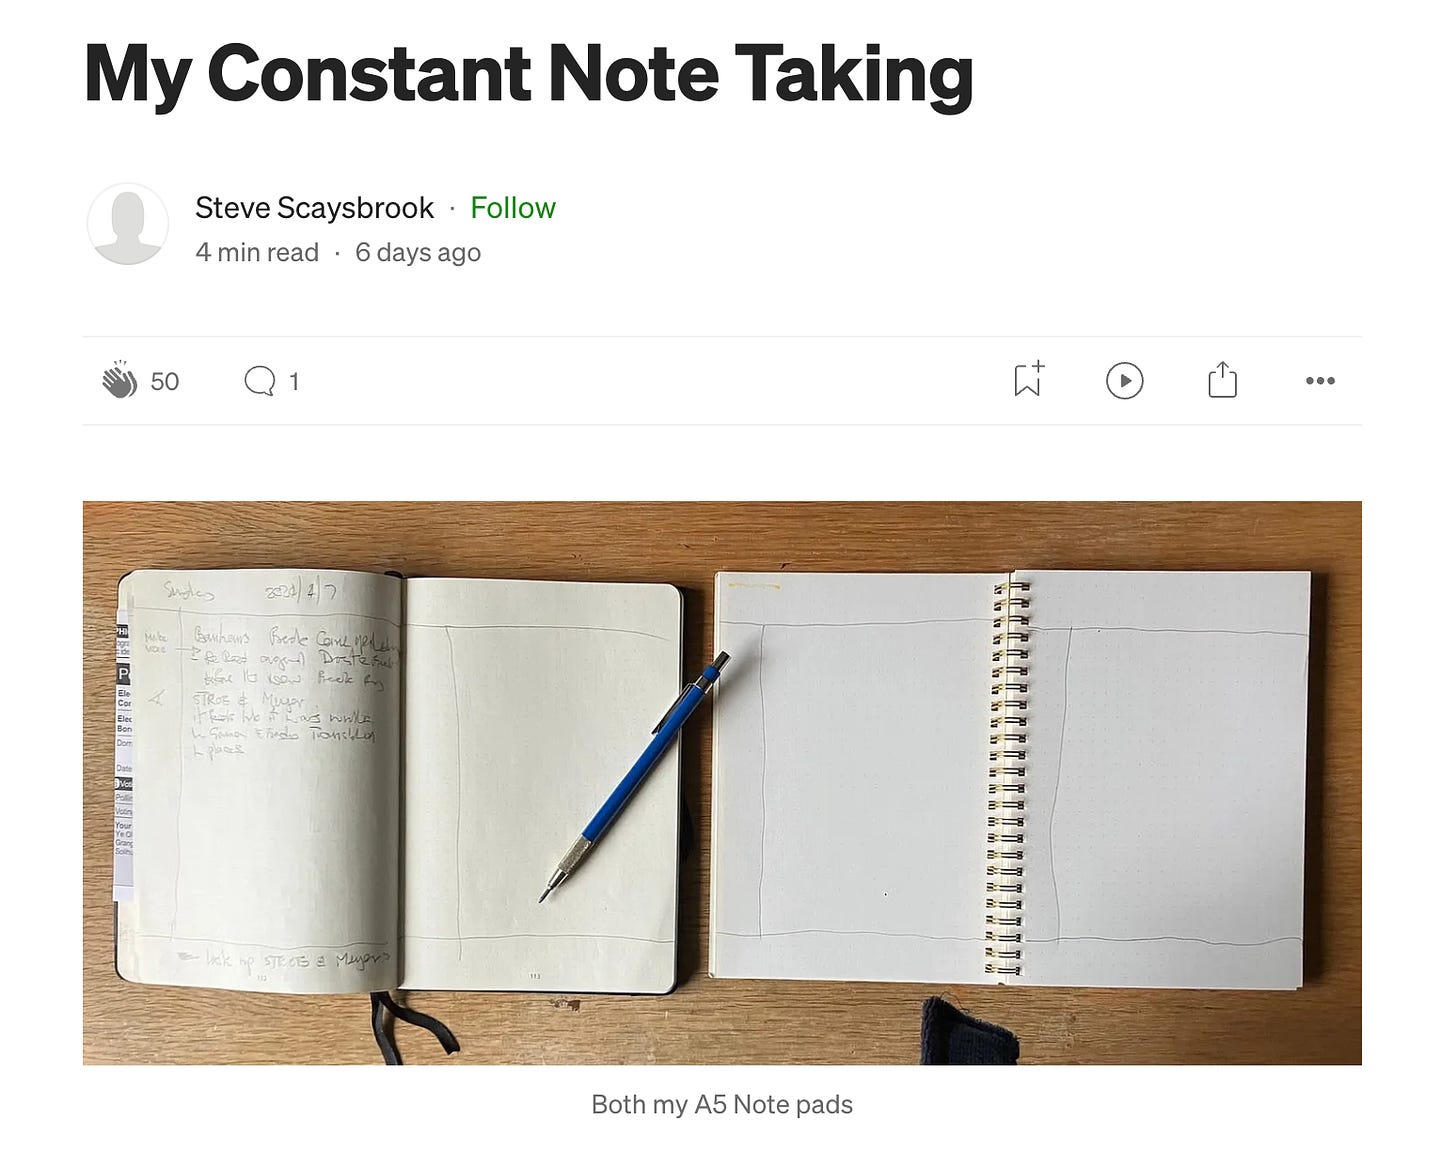 Screenshot of an article showing the heading (“My Constant Note Taking”), and a photo of two open A5 notebooks roughly ruled by hand into a Cornell note taking format.